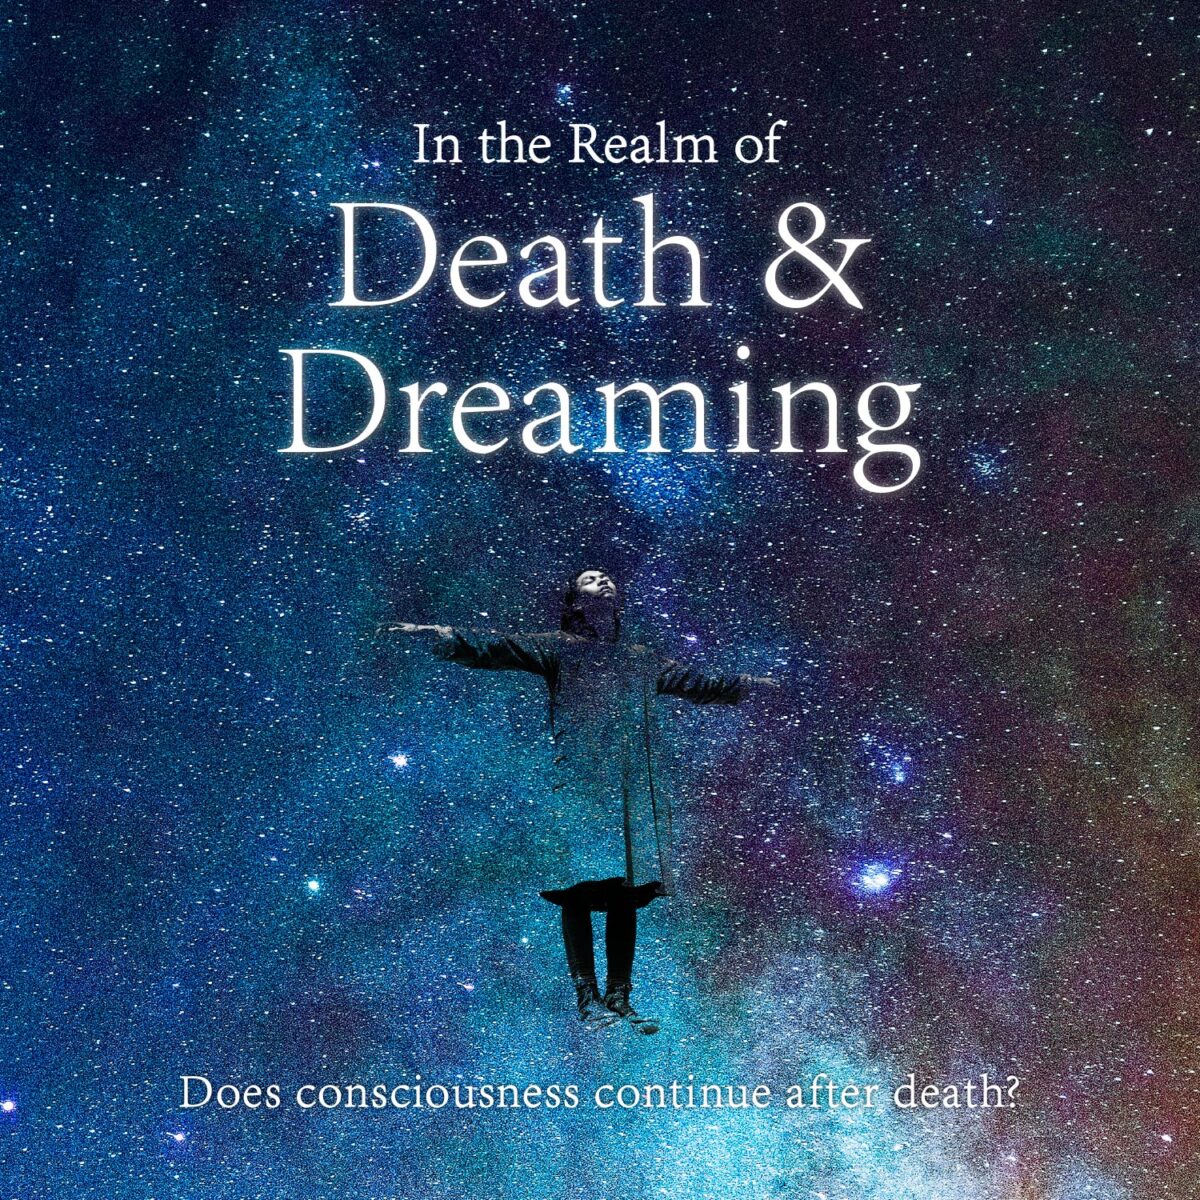 In the Realm of Death & Dreaming – The Movie